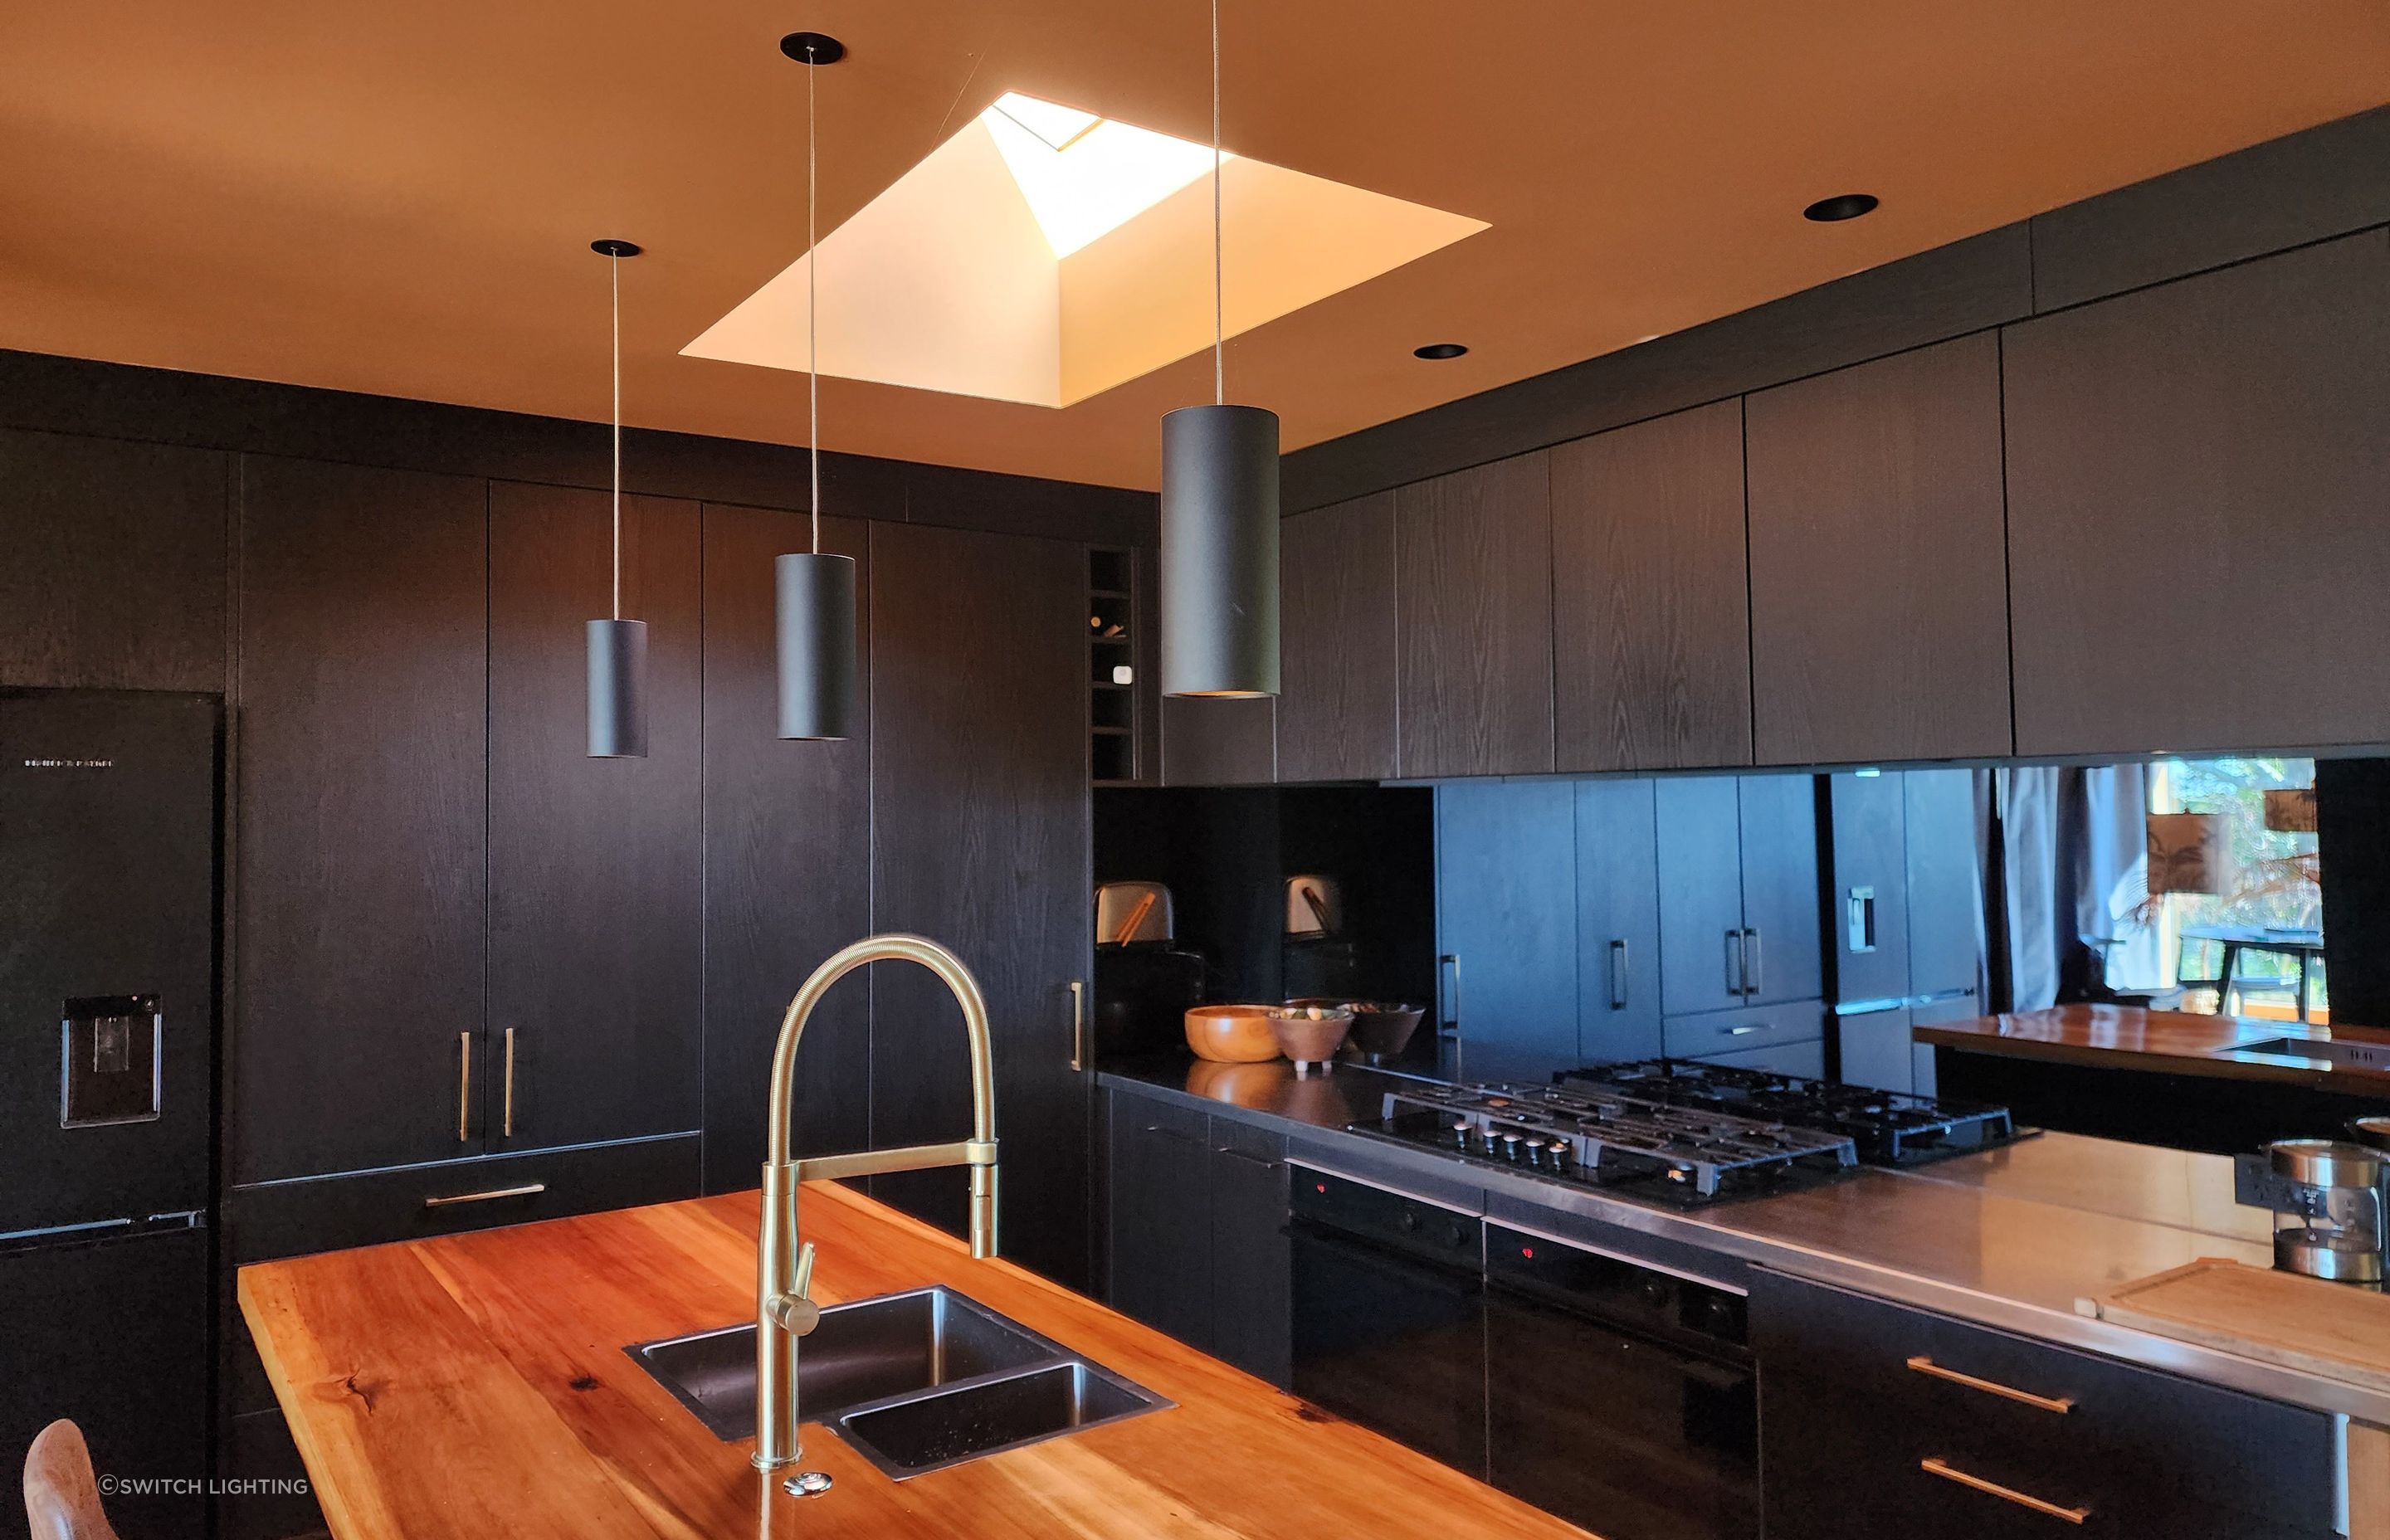 The Switch Lighting ZELA décor Pendant has been applied as task lighting over this kitchen island.